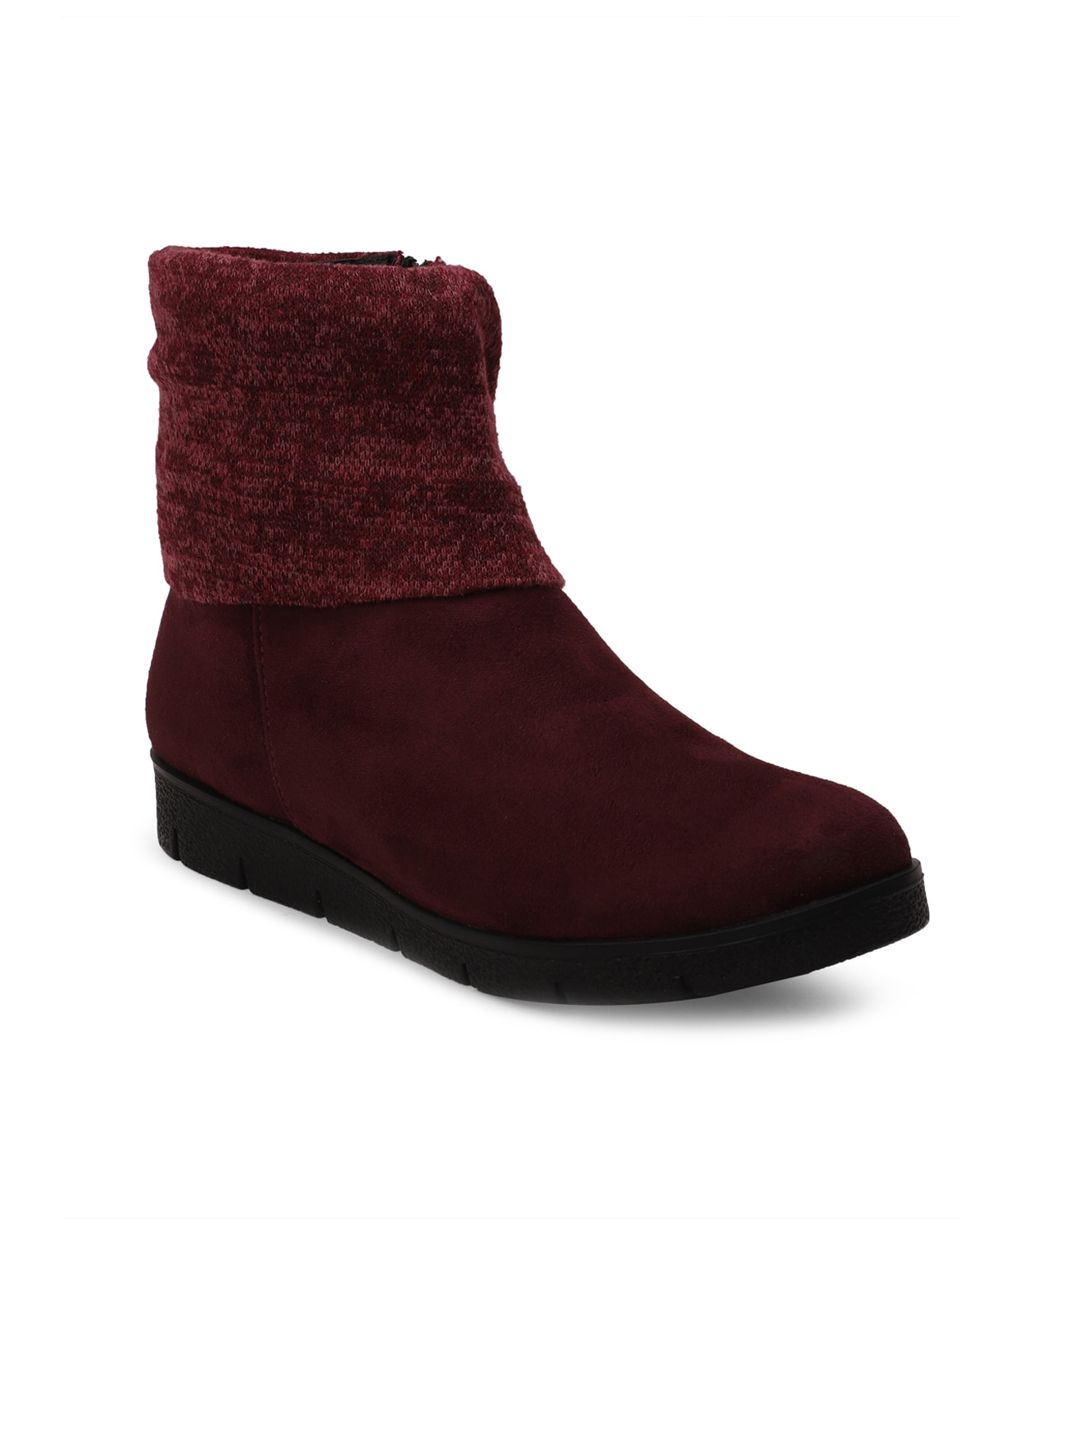 Bruno Manetti Woman Maroon Suede Block Heeled Boots Price in India